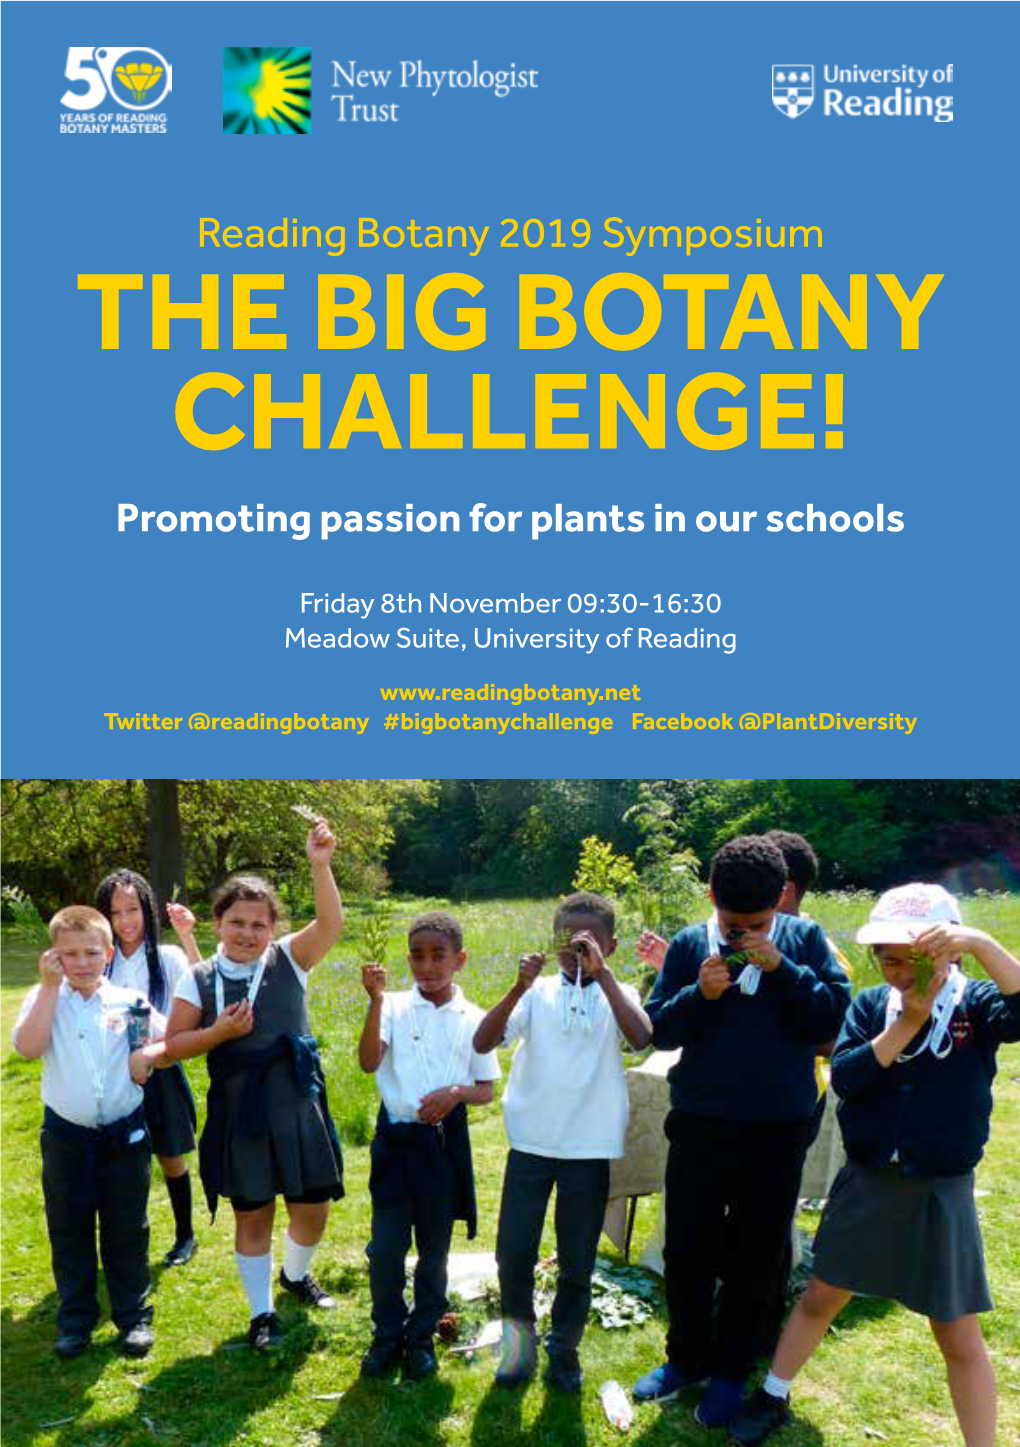 THE BIG BOTANY CHALLENGE! Promoting Passion for Plants in Our Schools